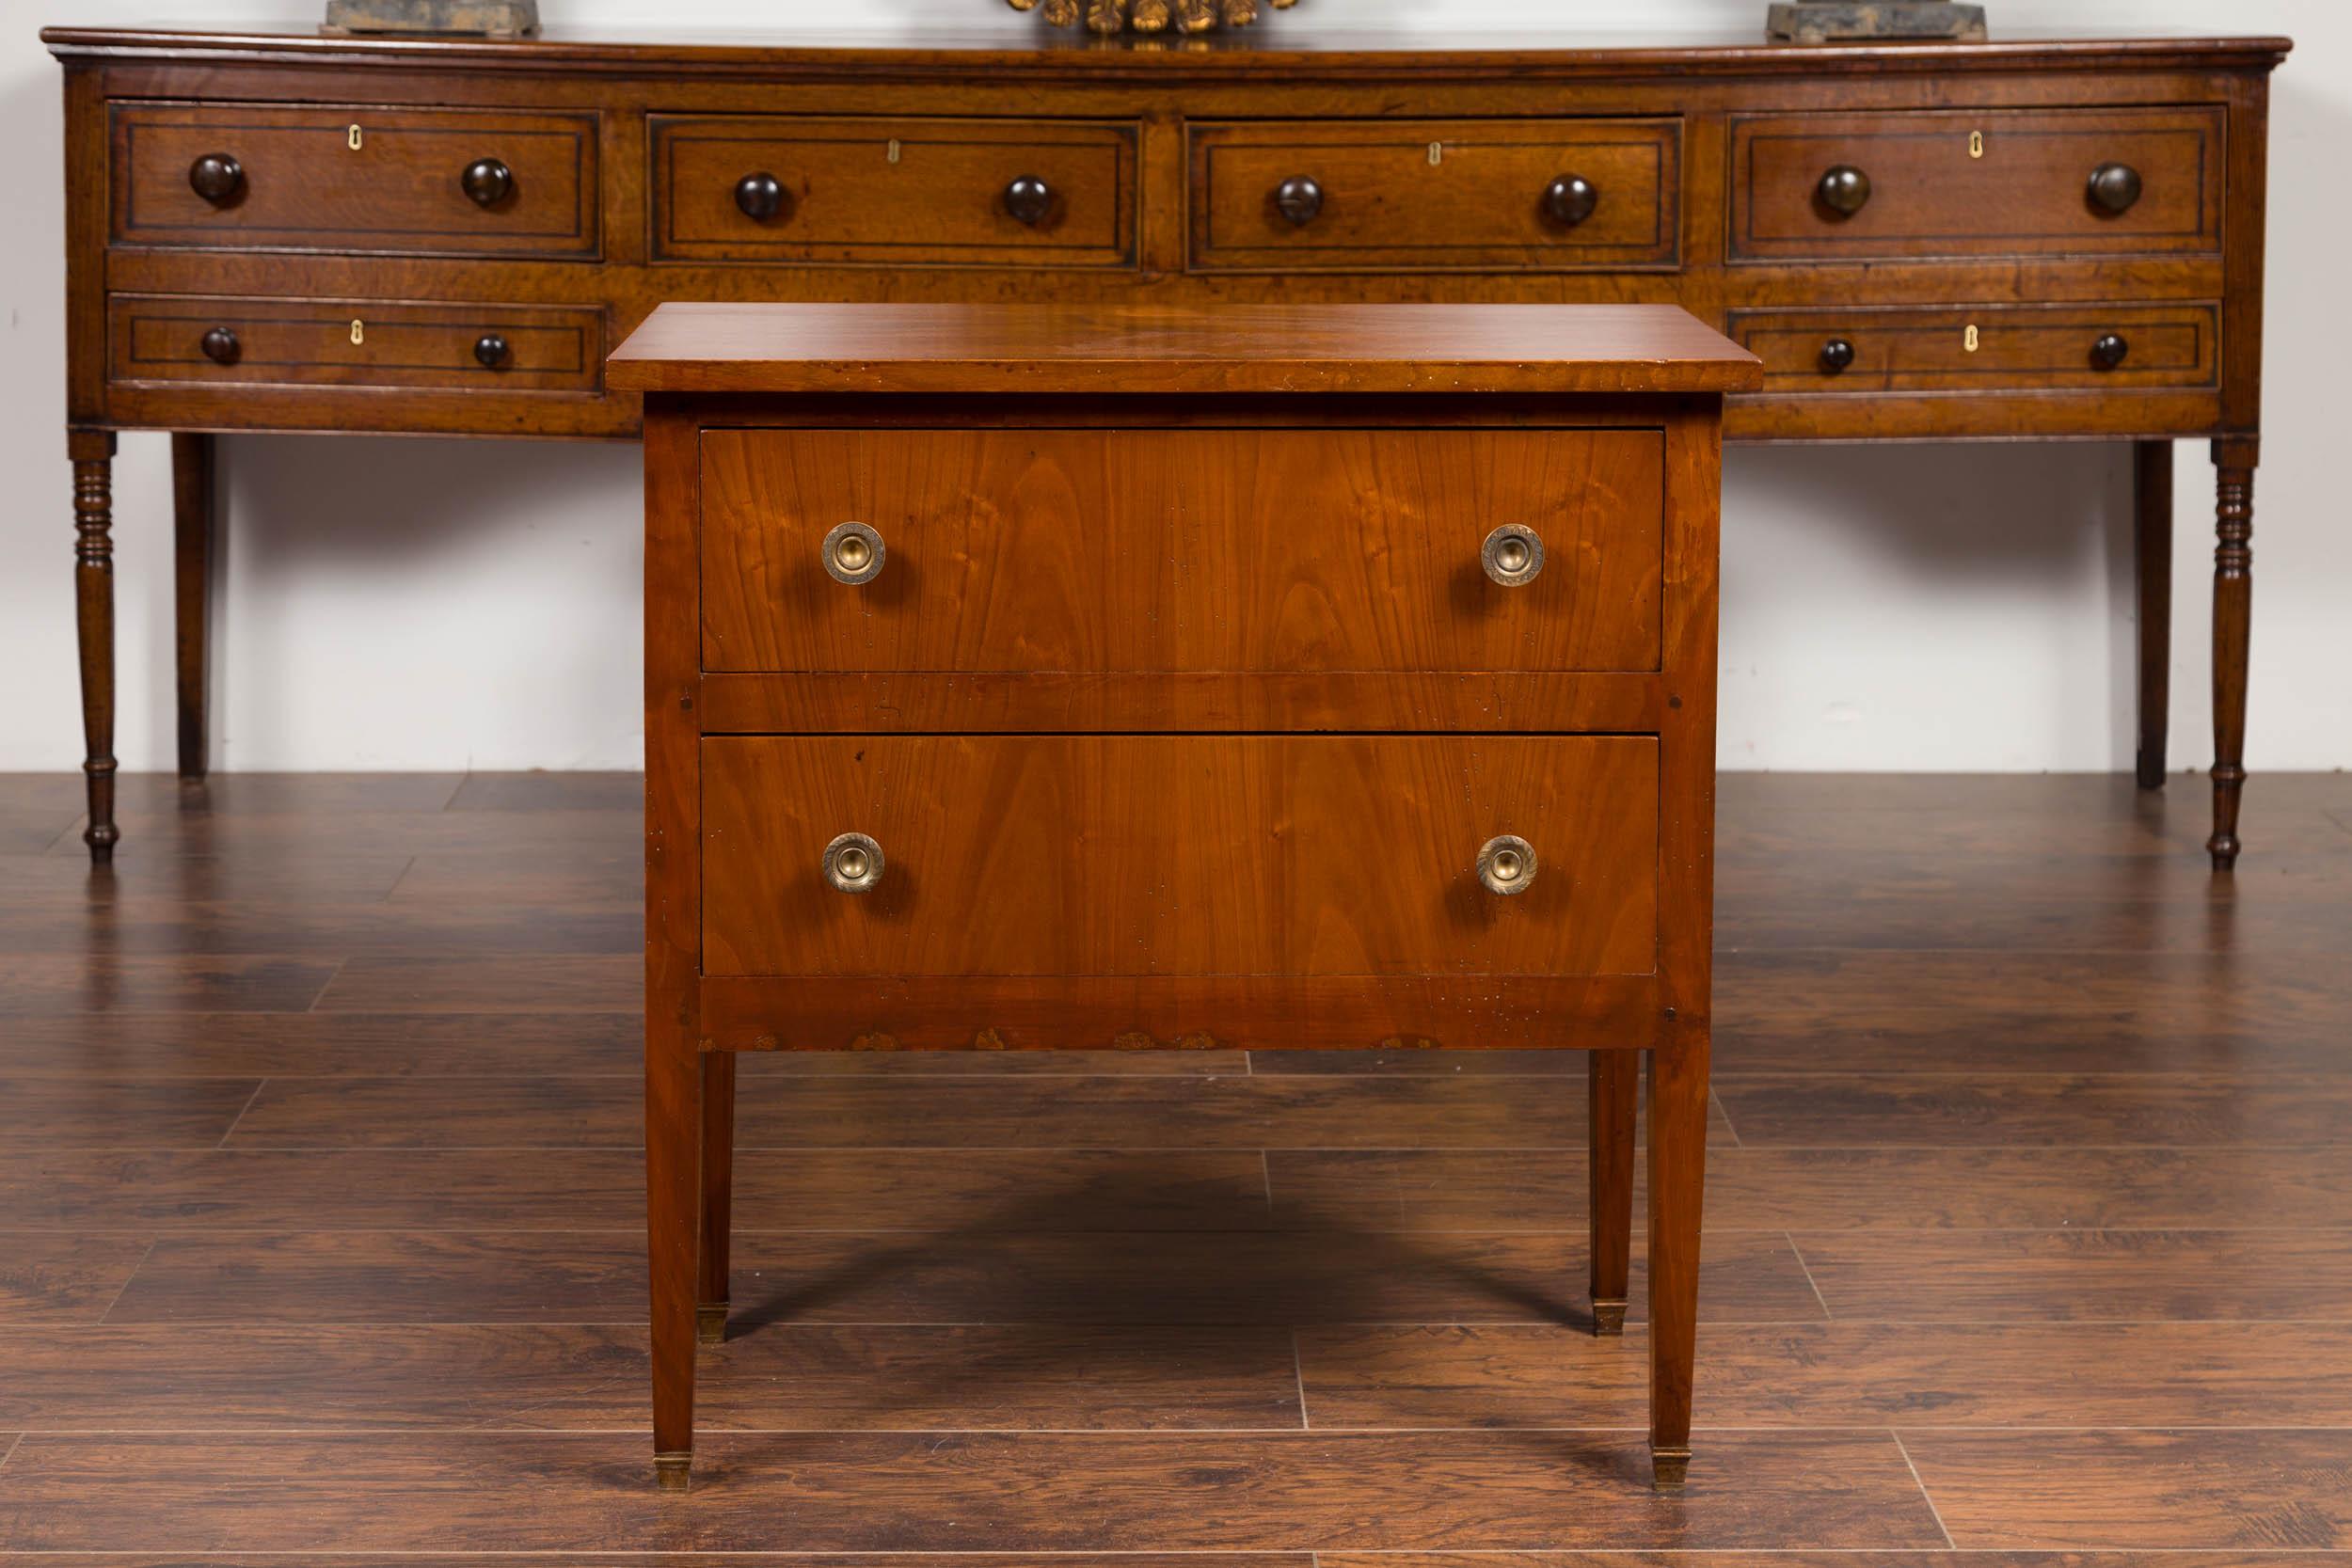 A French bookmark veneer two-drawer commode from the early 20th century, with petite brass feet. Born in France at the turn of the century, this wooden commode features a rectangular planked top overhanging two dovetailed drawers, each fitted with